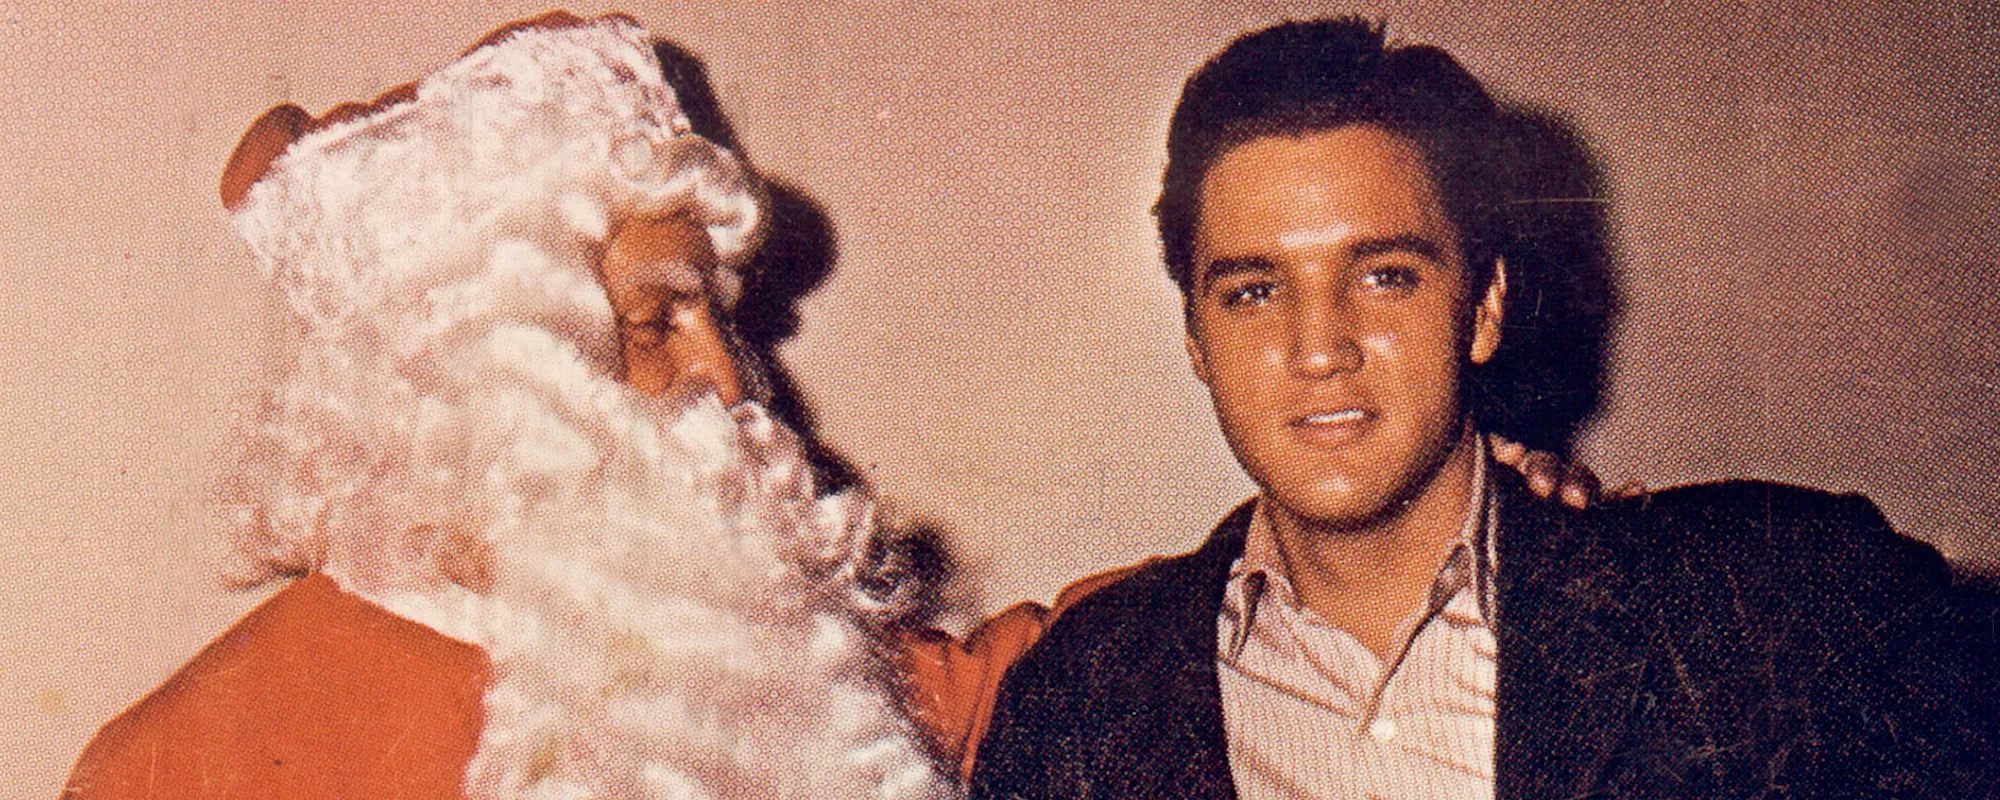 Elvis Presley Still Has the Best-Selling Christmas Album of All Time